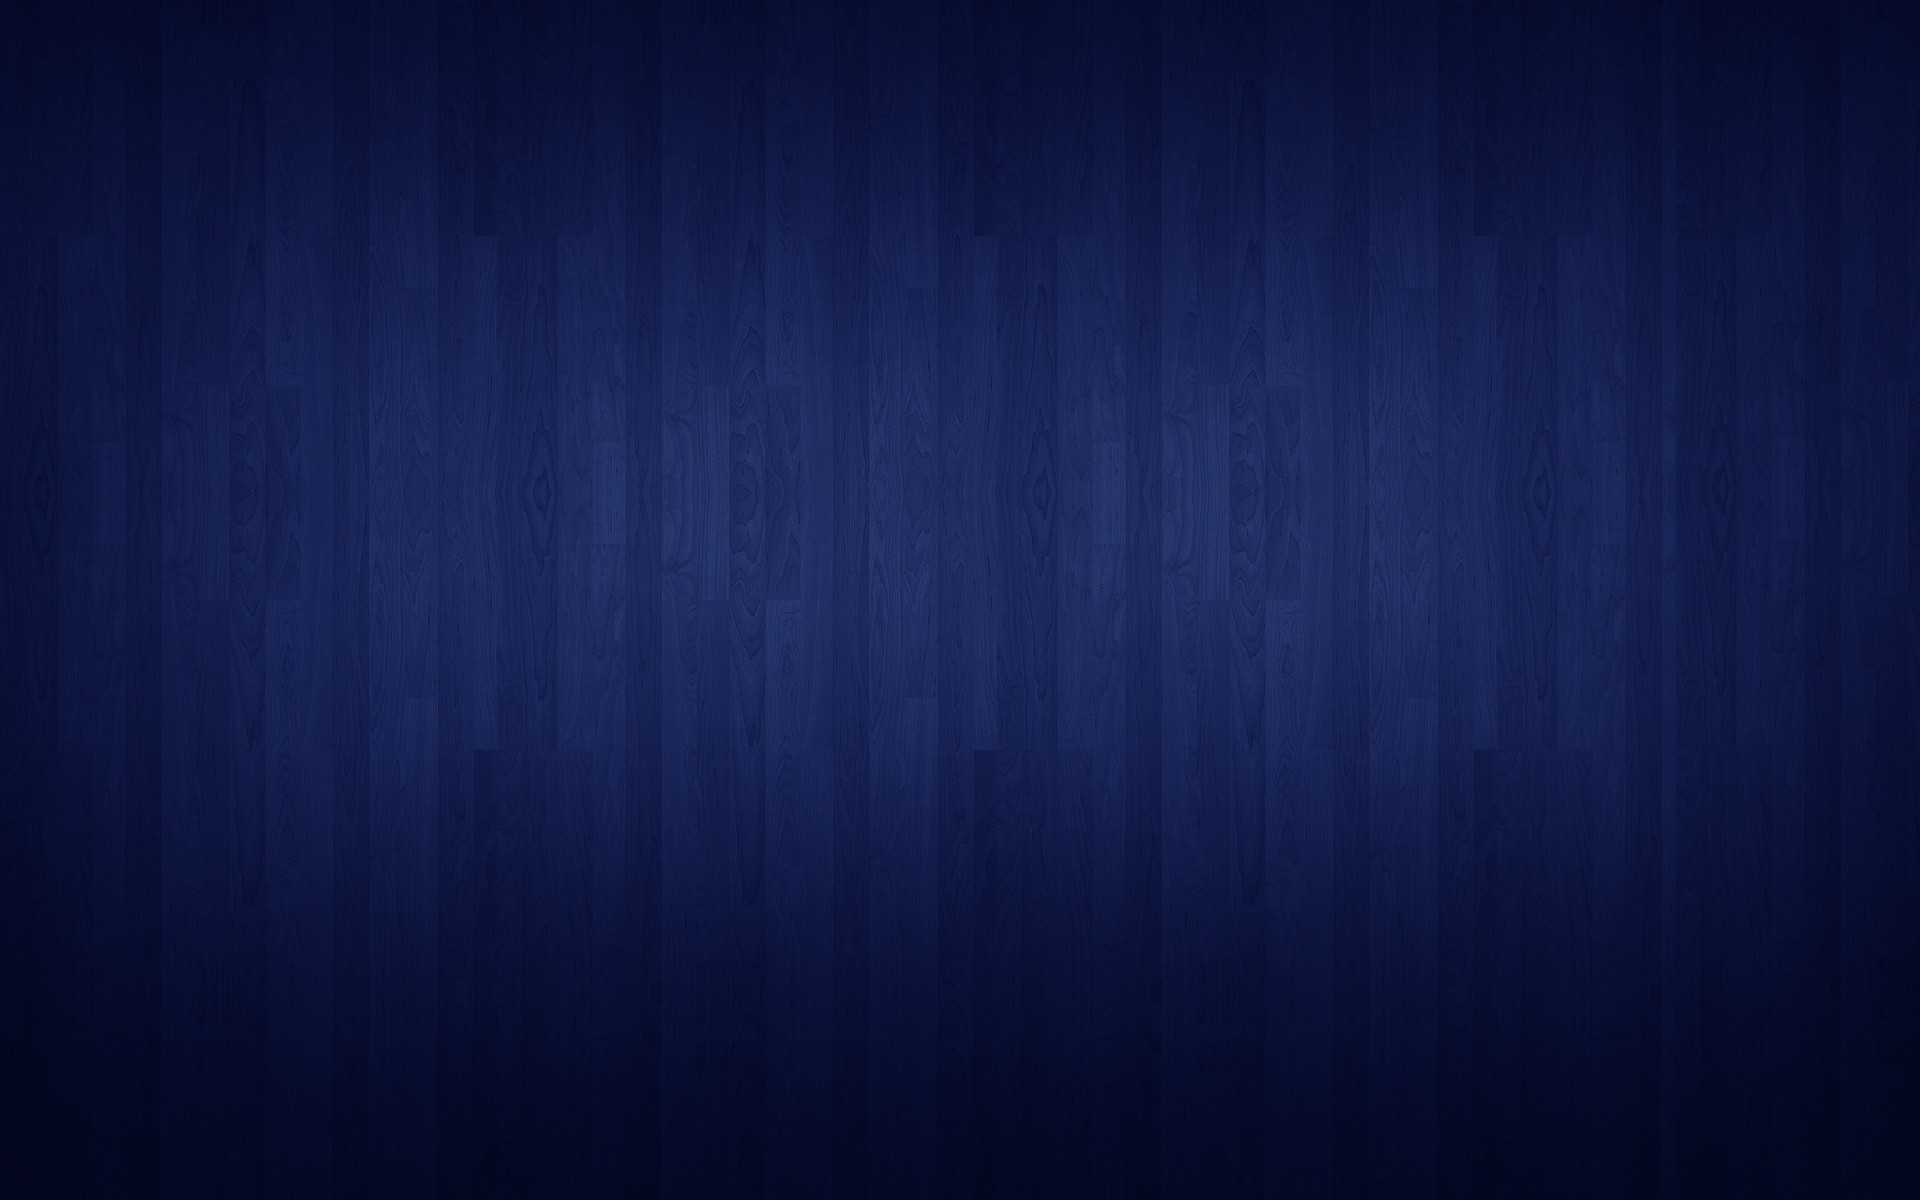 1920x1200 Background Images For Websites (27 Wallpapers)